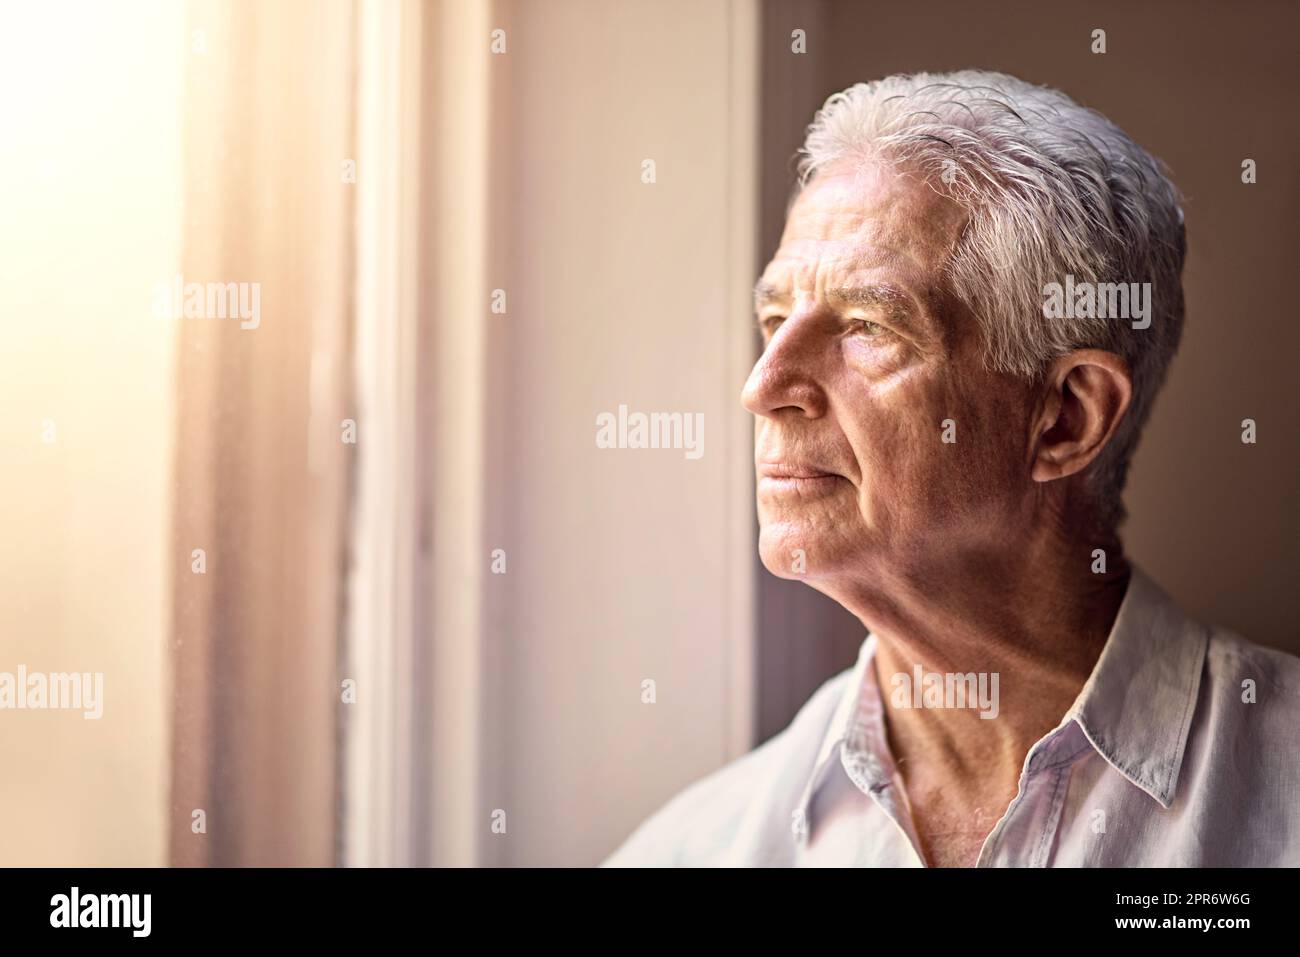 Memories are timeless treasures of the heart. Shot of a senior man looking thoughtful. Stock Photo